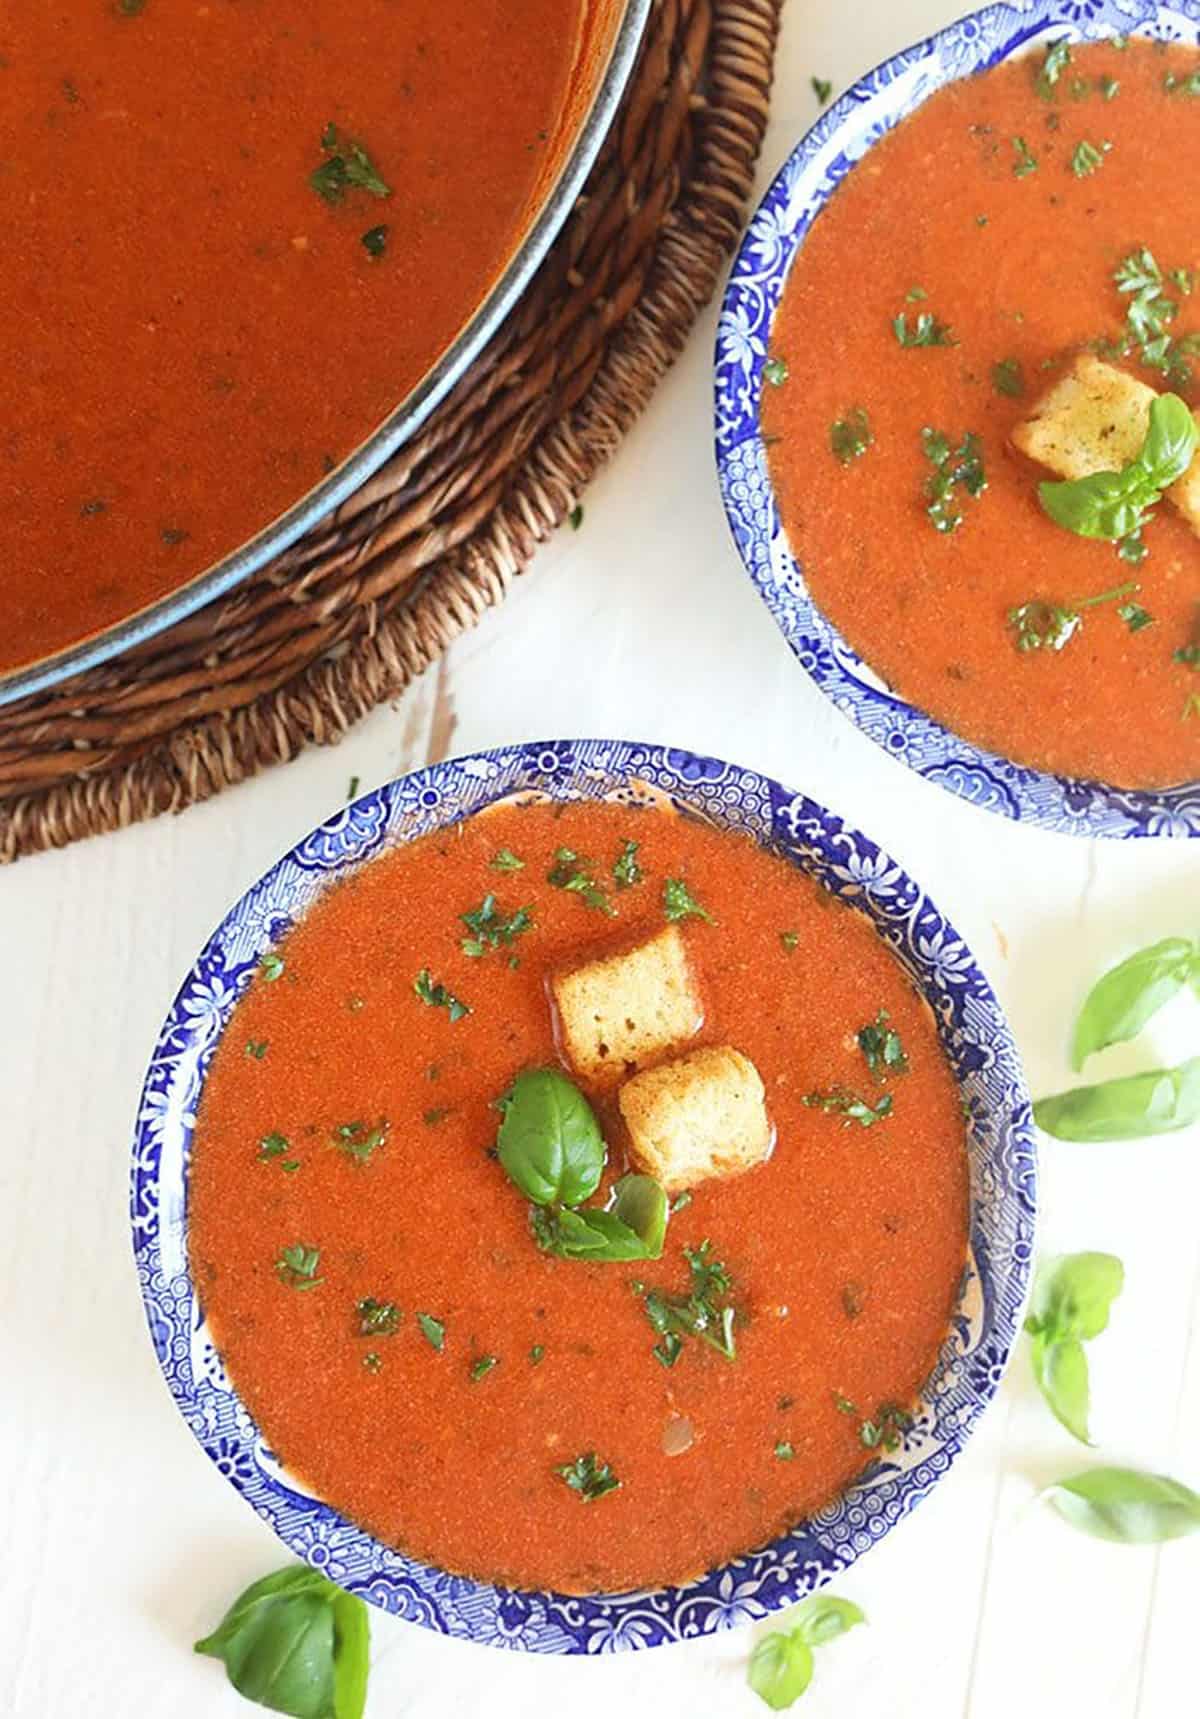 Overhead shot of tomato basil bisque with croutons in a blue and white bowl on a white background.